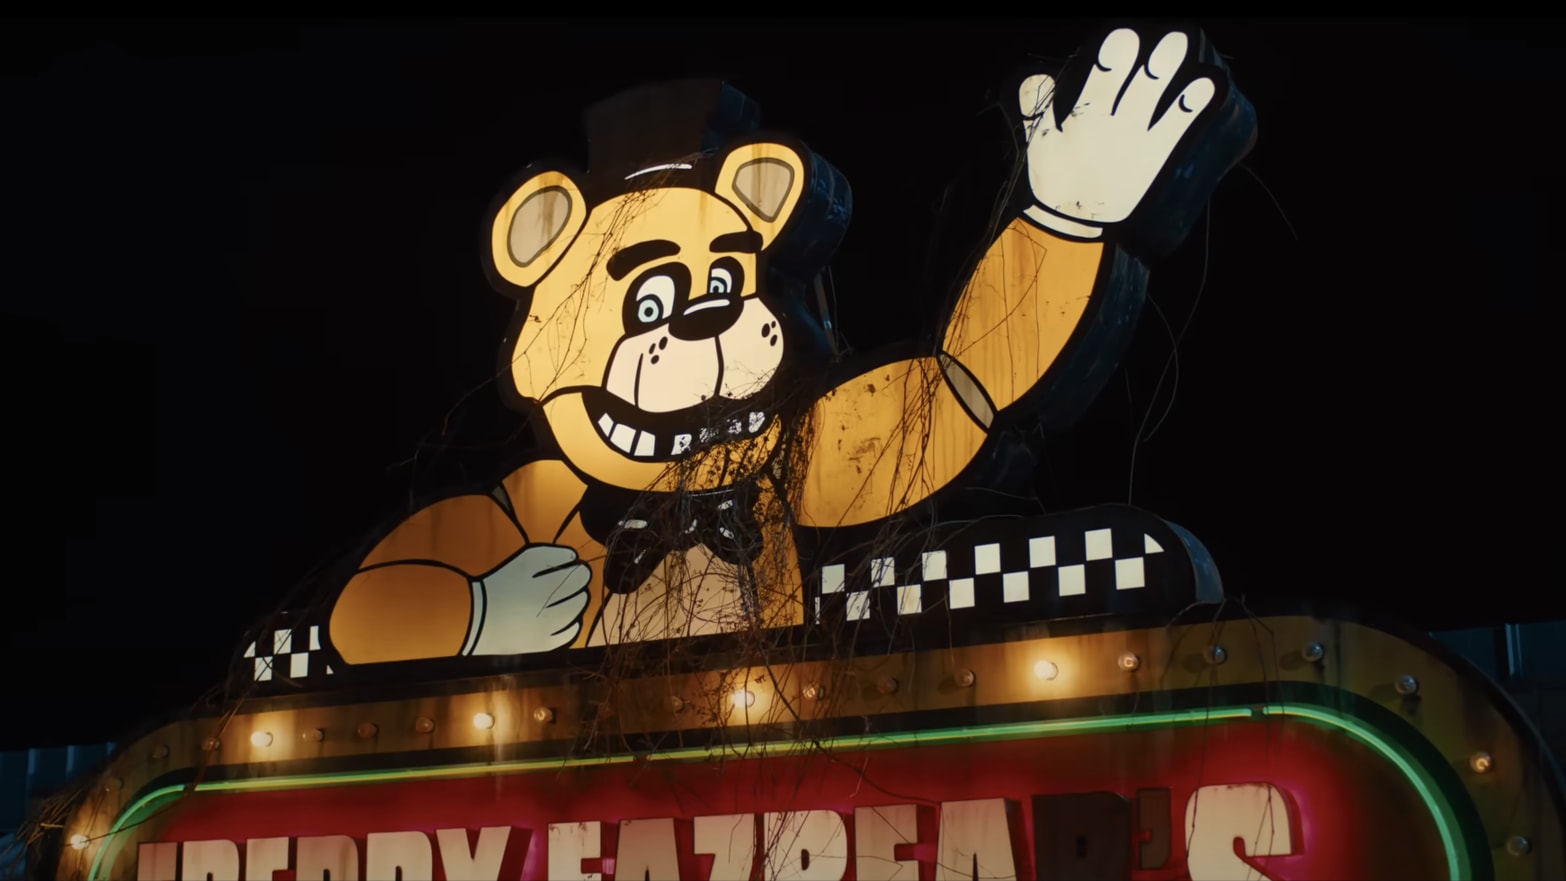 Five Nights at Freddy's' Trailer: Horror Video Game Comes to Life